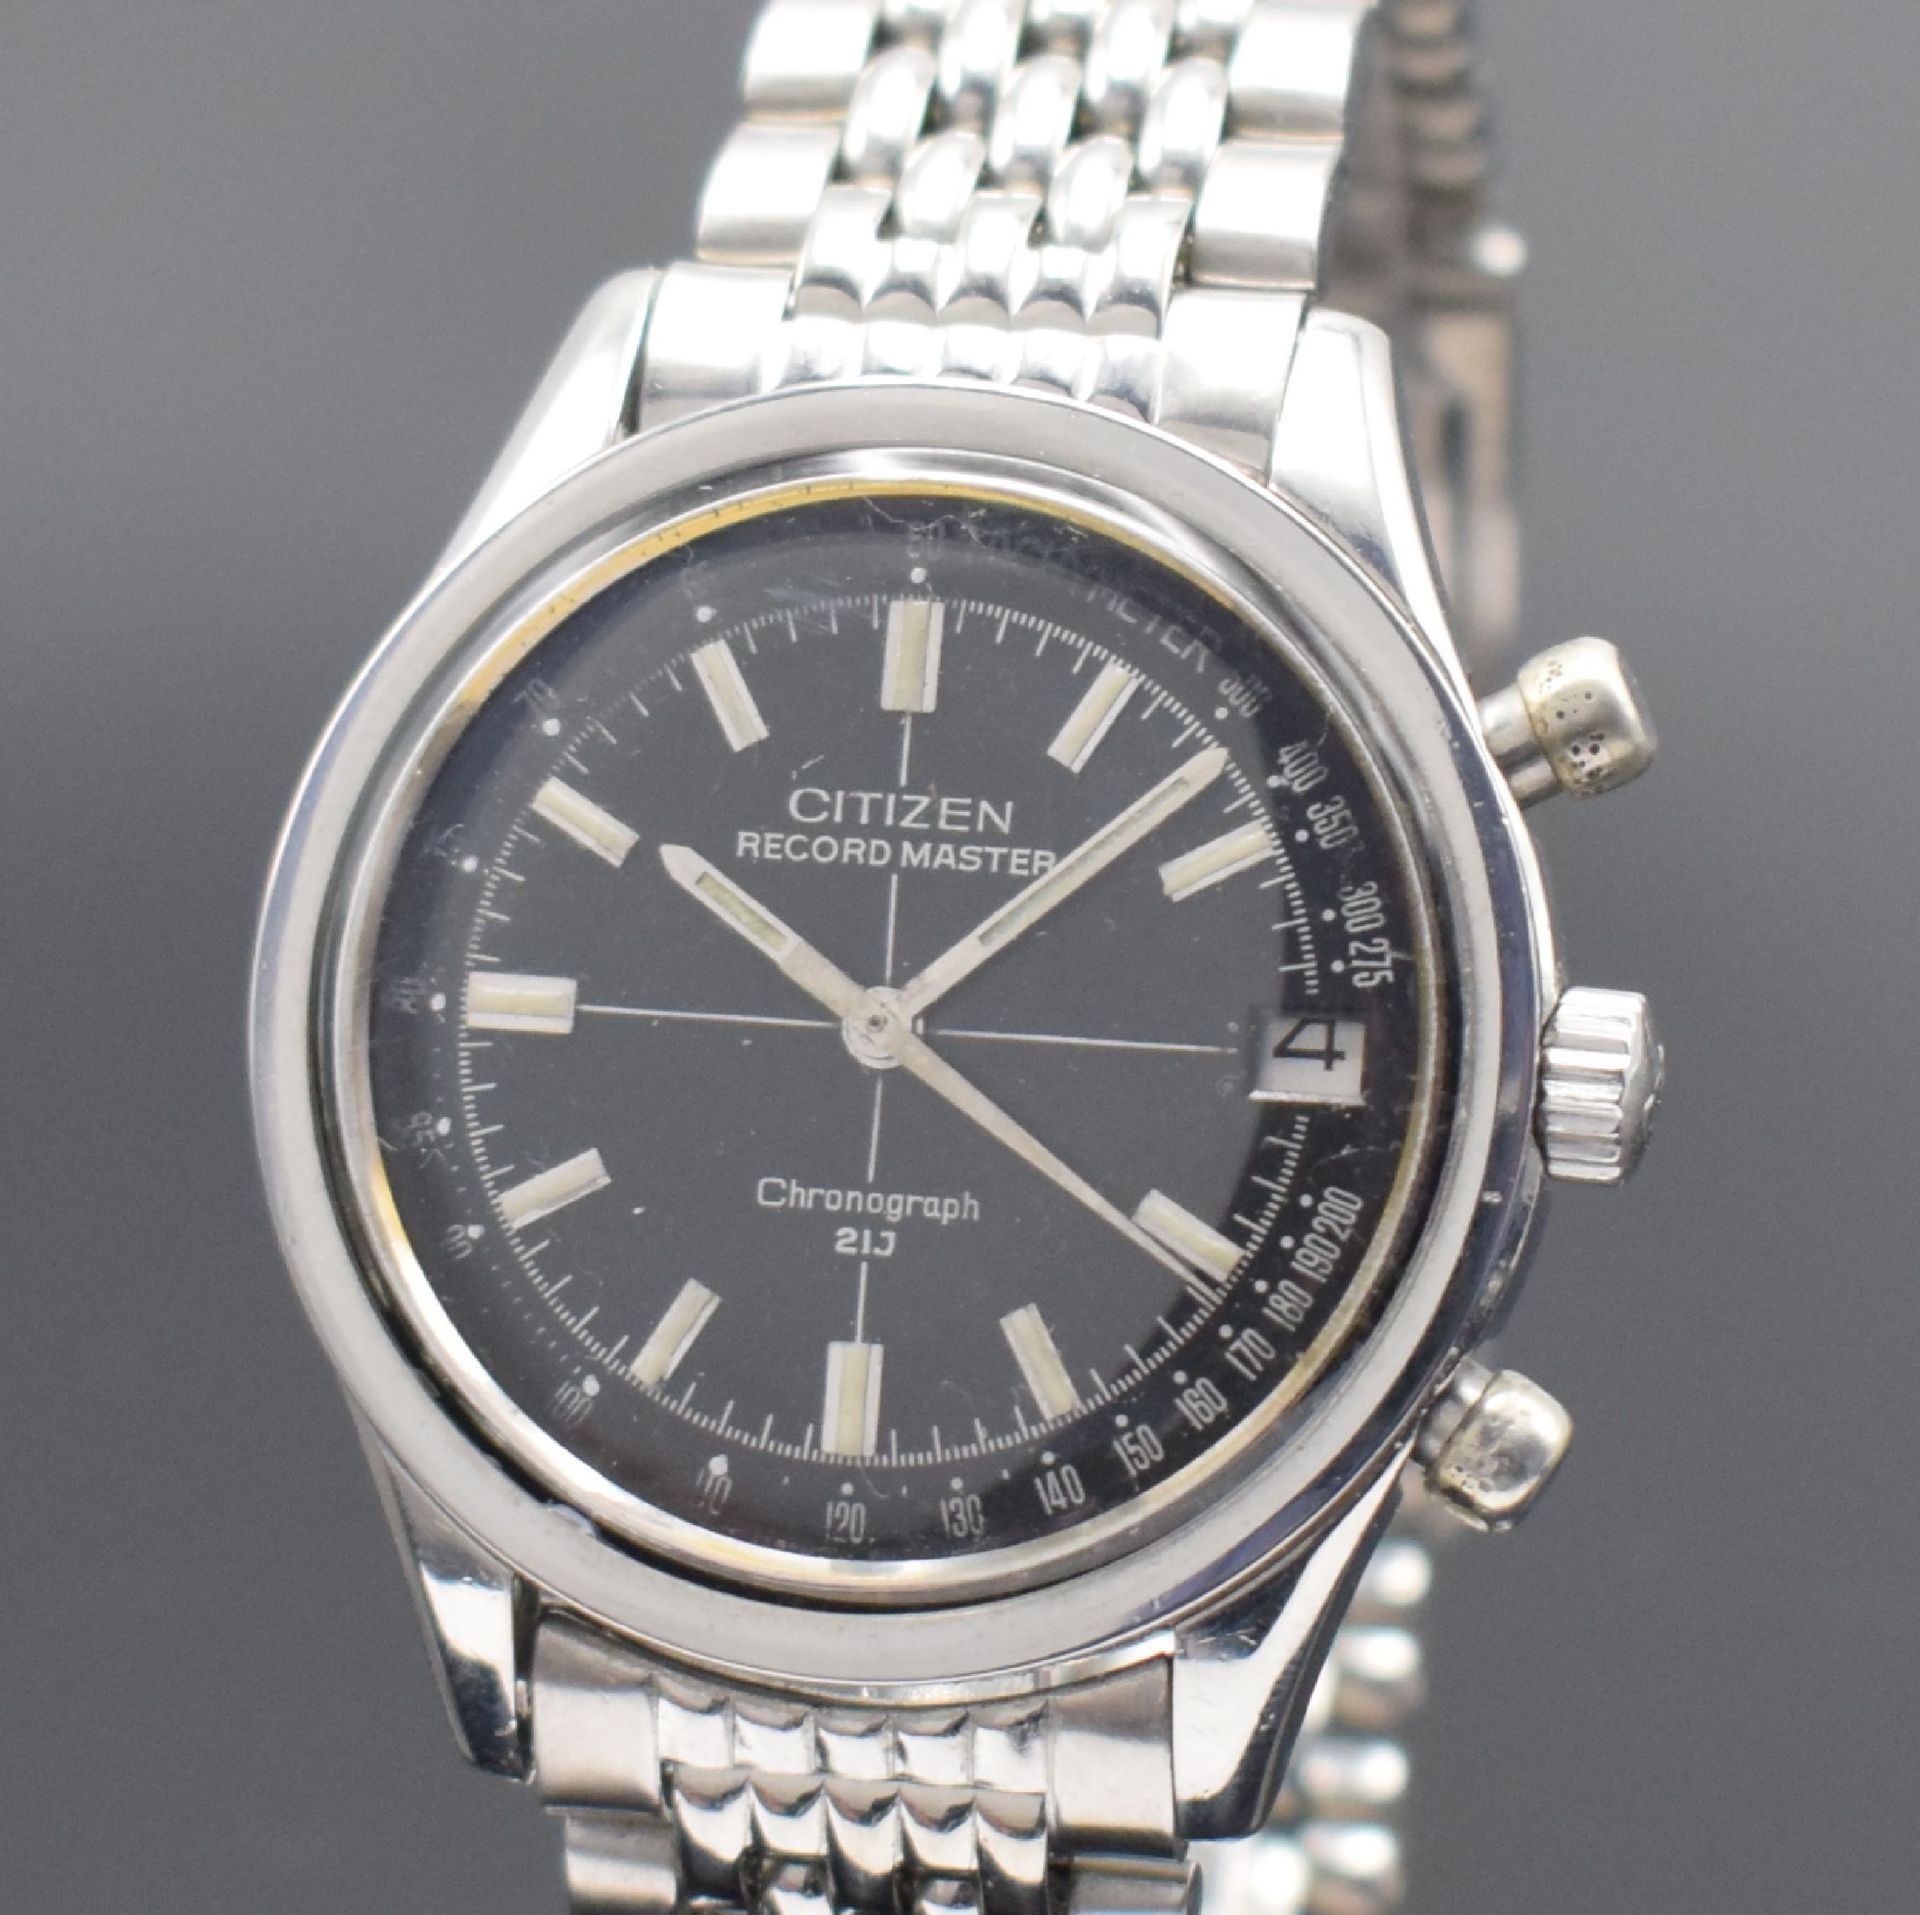 CITIZEN Record Master seltener Chronograph mit Flyback in - Image 2 of 6